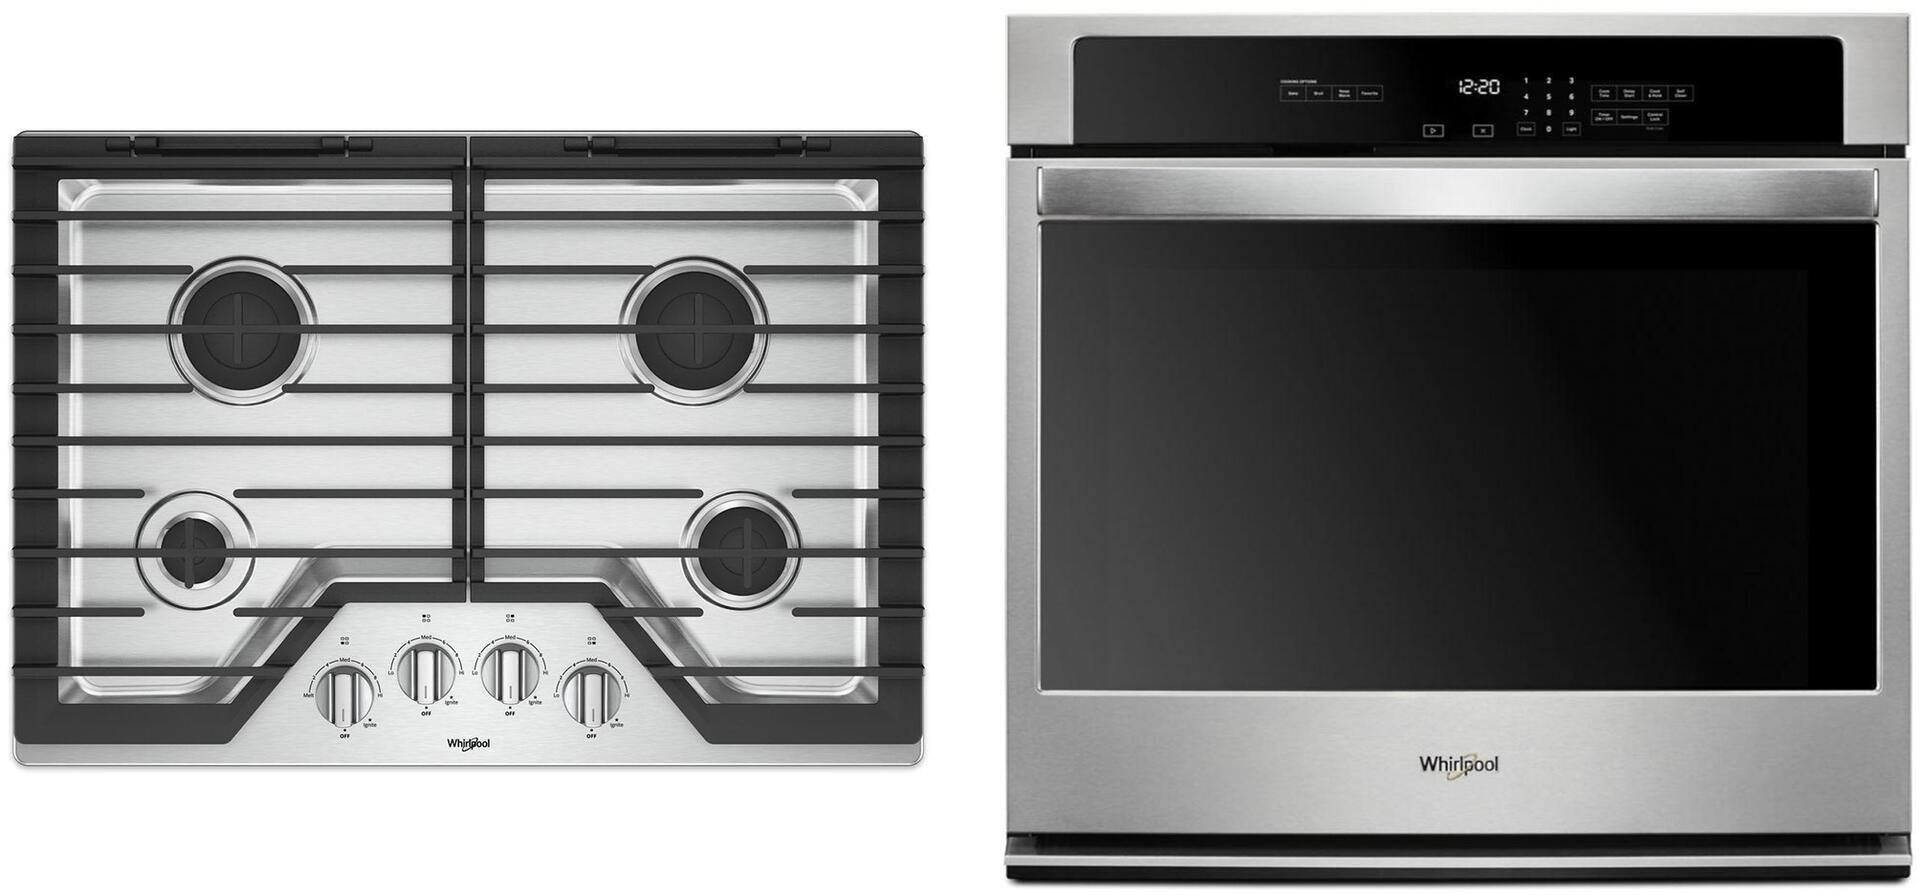 Whirlpool Cooktop and Oven Package $1869.60